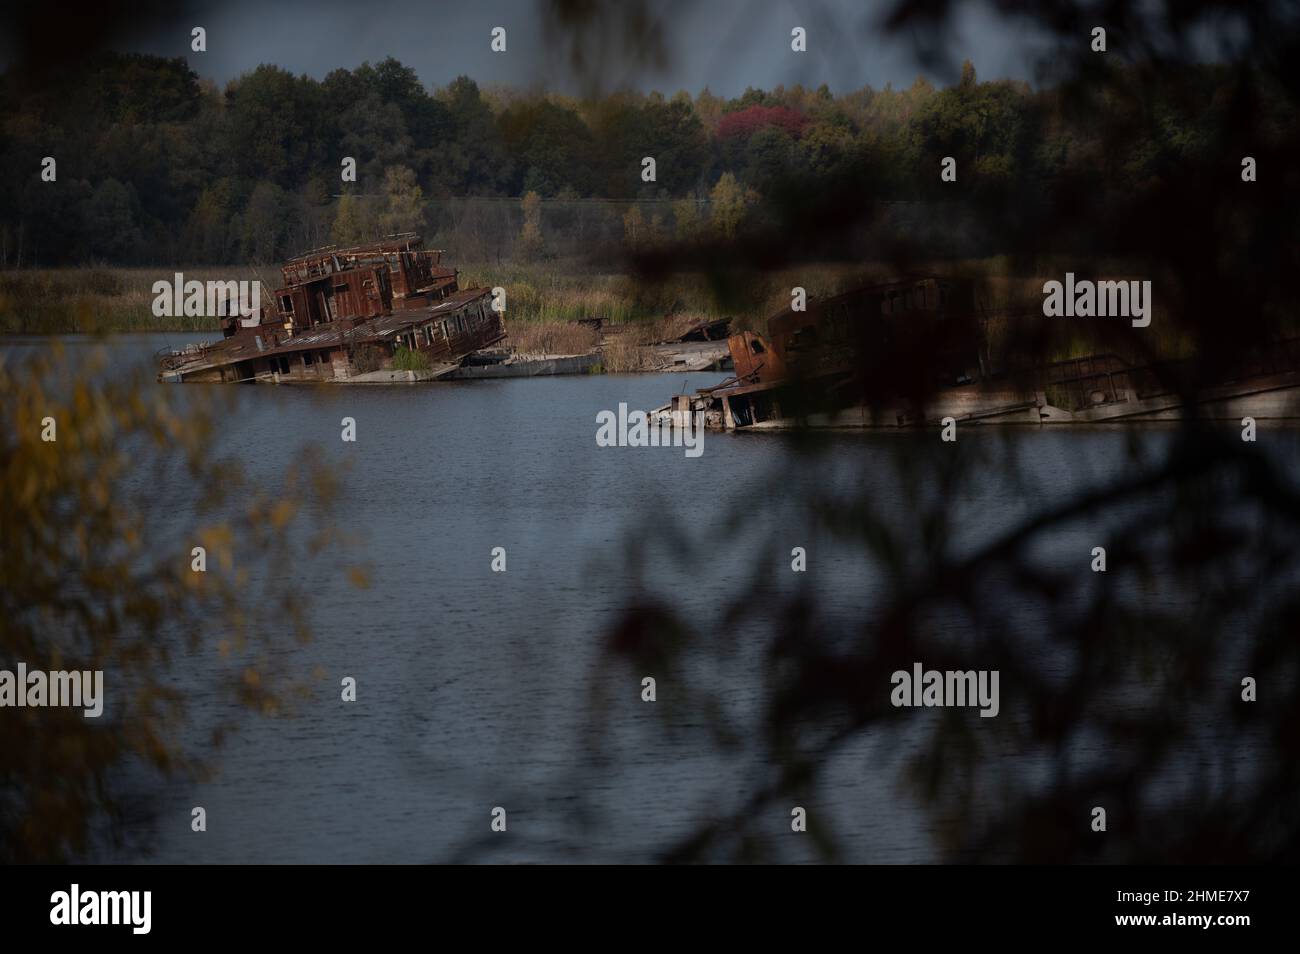 Sunken boats lie in the Chernobyl Ship Yard on the Pripyat River, near the Chernobyl Nuclear Power Plant. Stock Photo